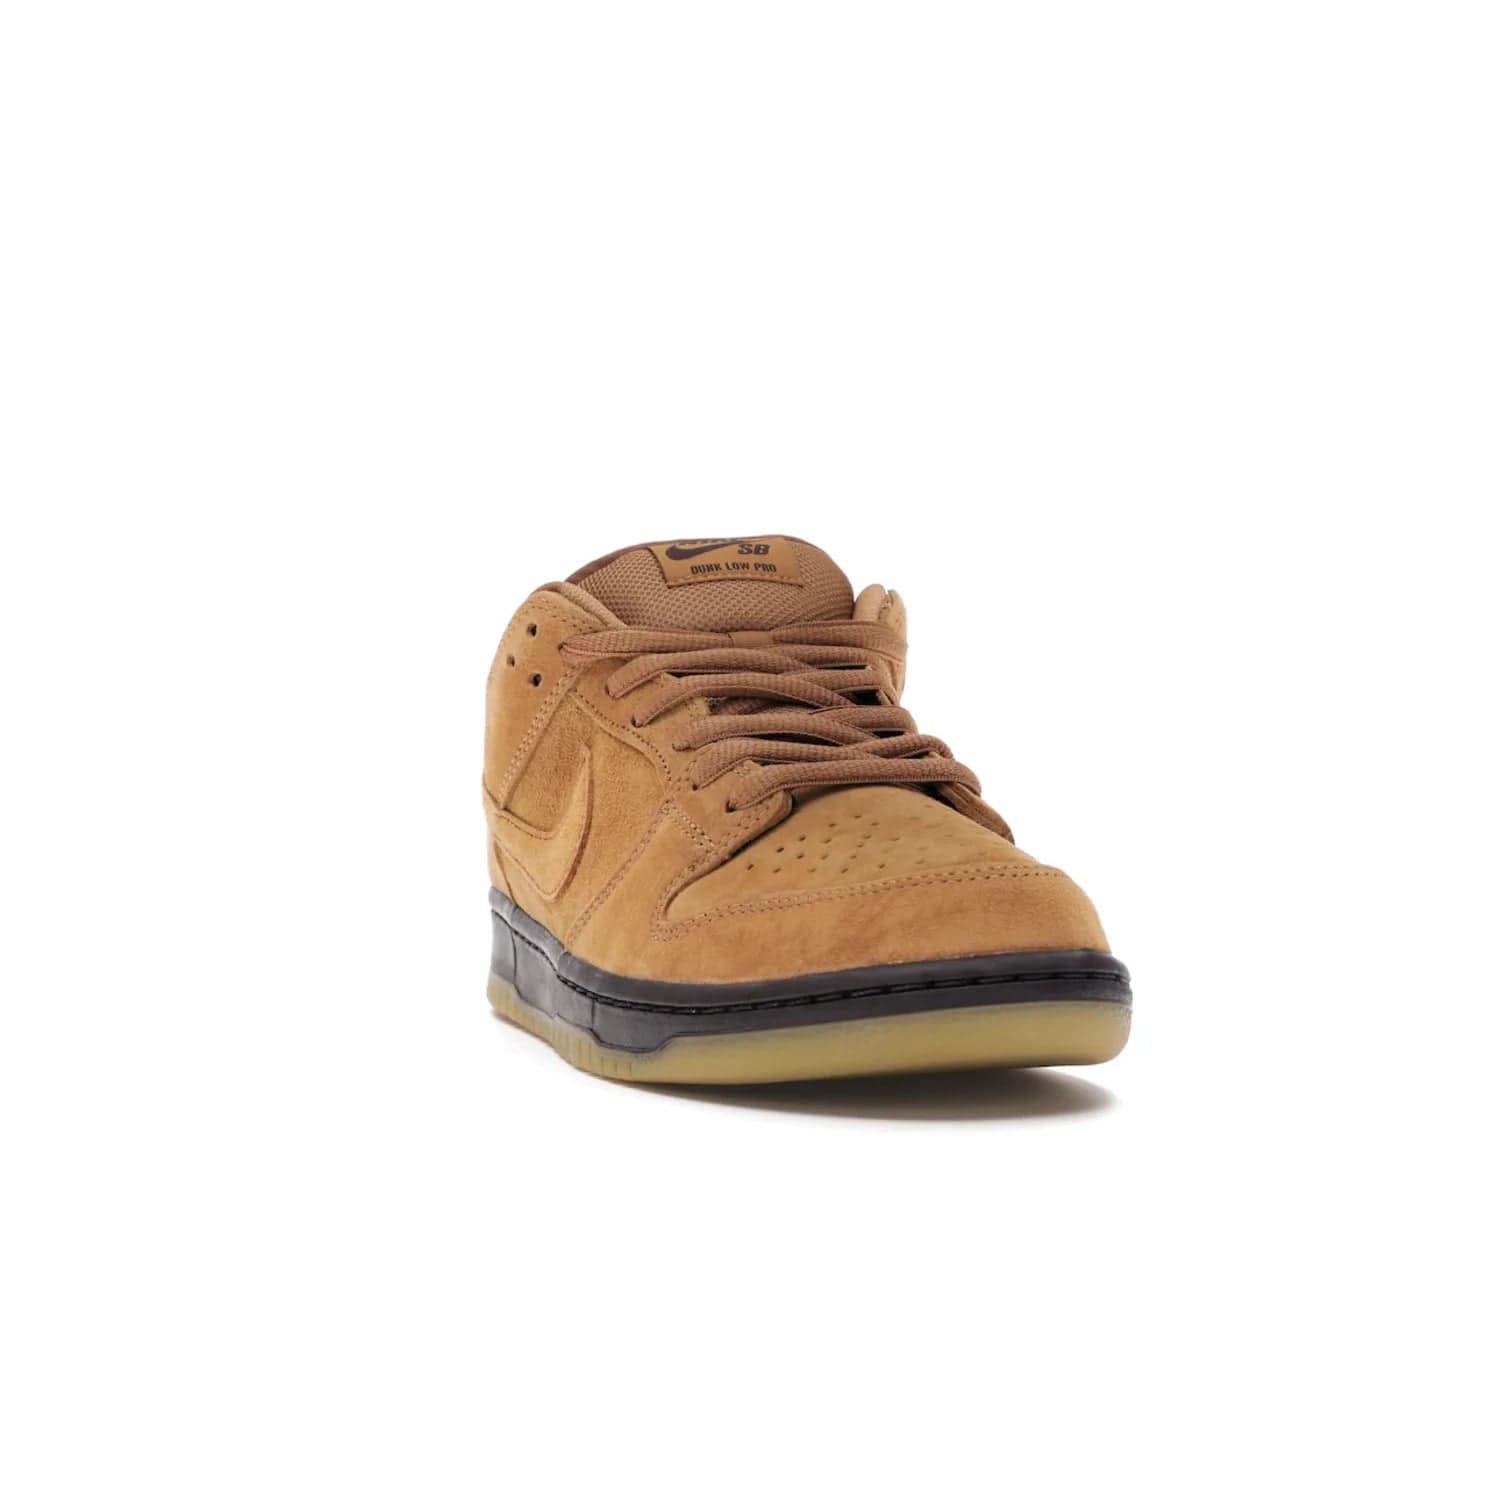 Nike SB Dunk Low Wheat (2021/2023) - Image 8 - Only at www.BallersClubKickz.com - The Nike SB Dunk Low Wheat (2021/2023)has a sleek silhouette and wheat suede upper. Tan tones for lining, mesh tongues, and laces. Iconic color palette midsole, perforated boxing toe. Brown branding on tongue and heel. Gum rubber outsole with partitioned pattern for traction. Eschewed in Feb 2021 for $110.